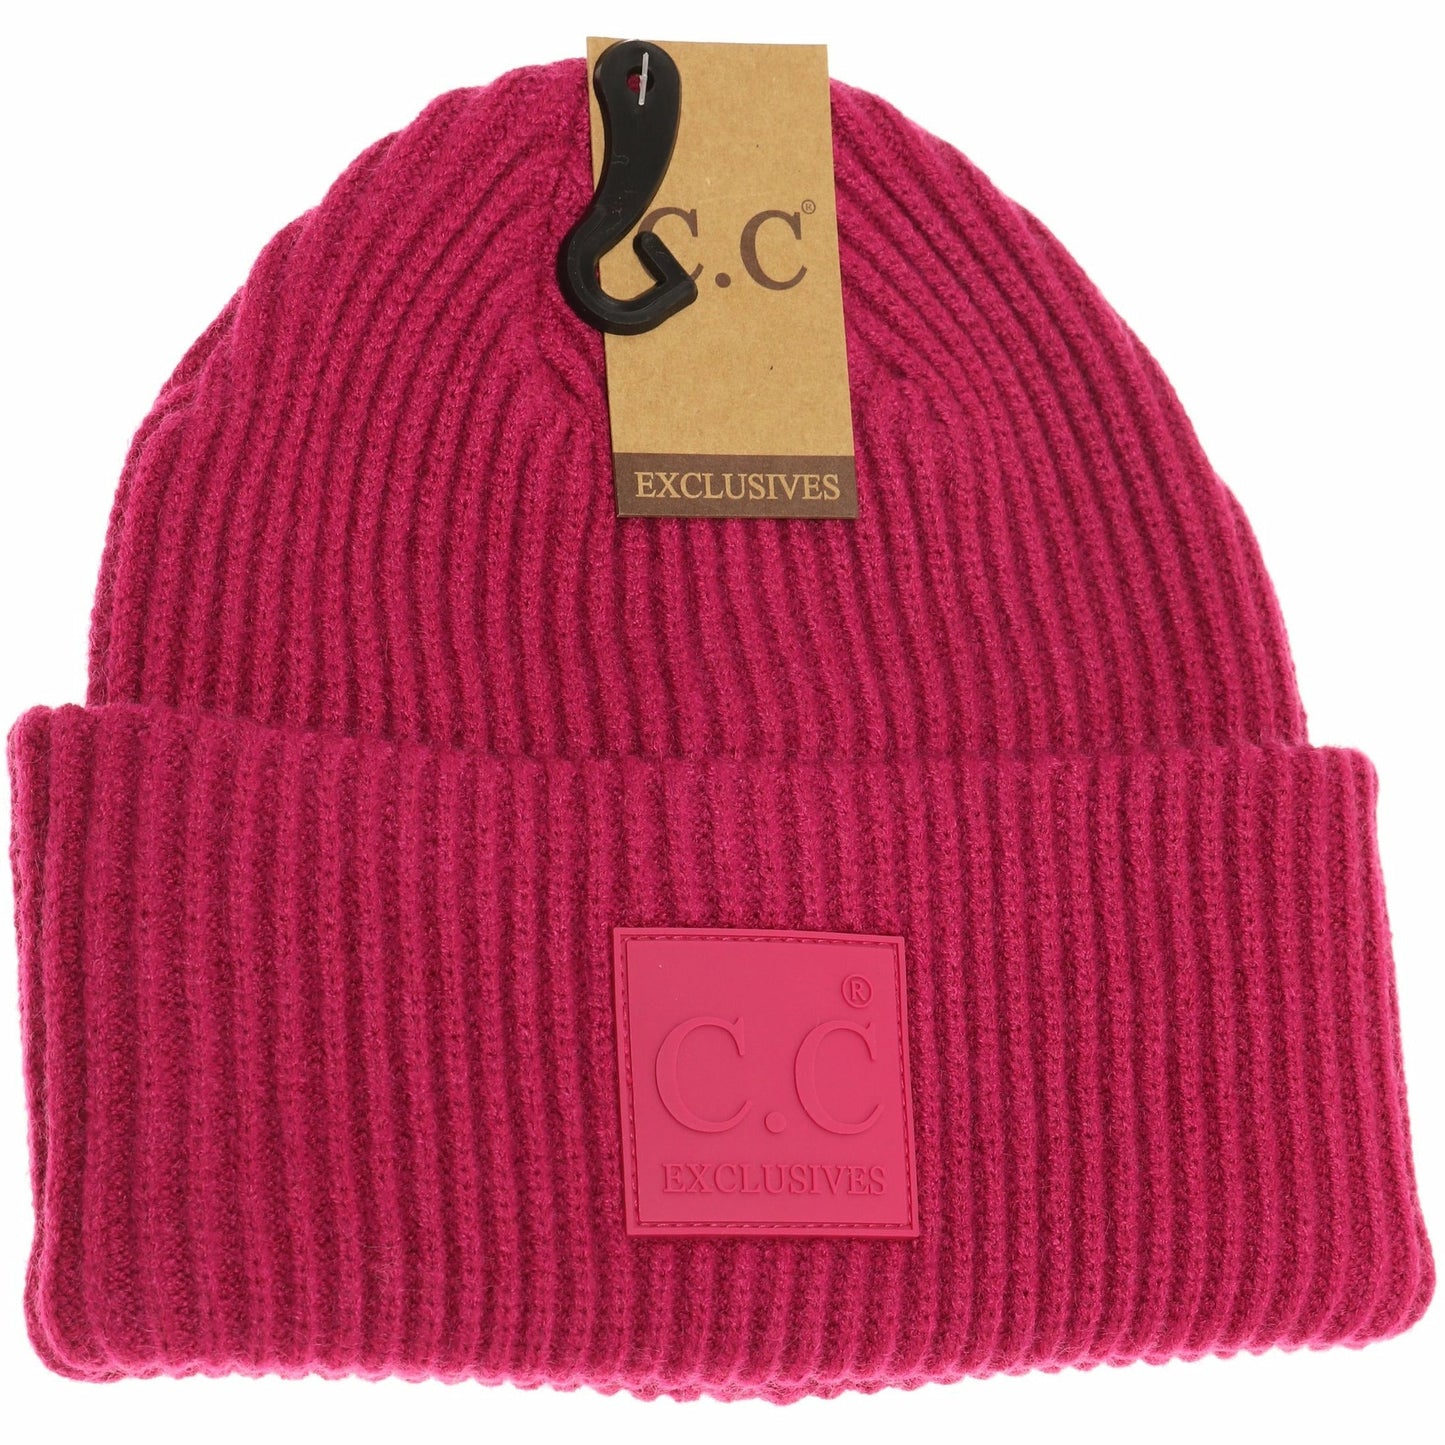 C.C. Hot Pink Ribbed Beanie